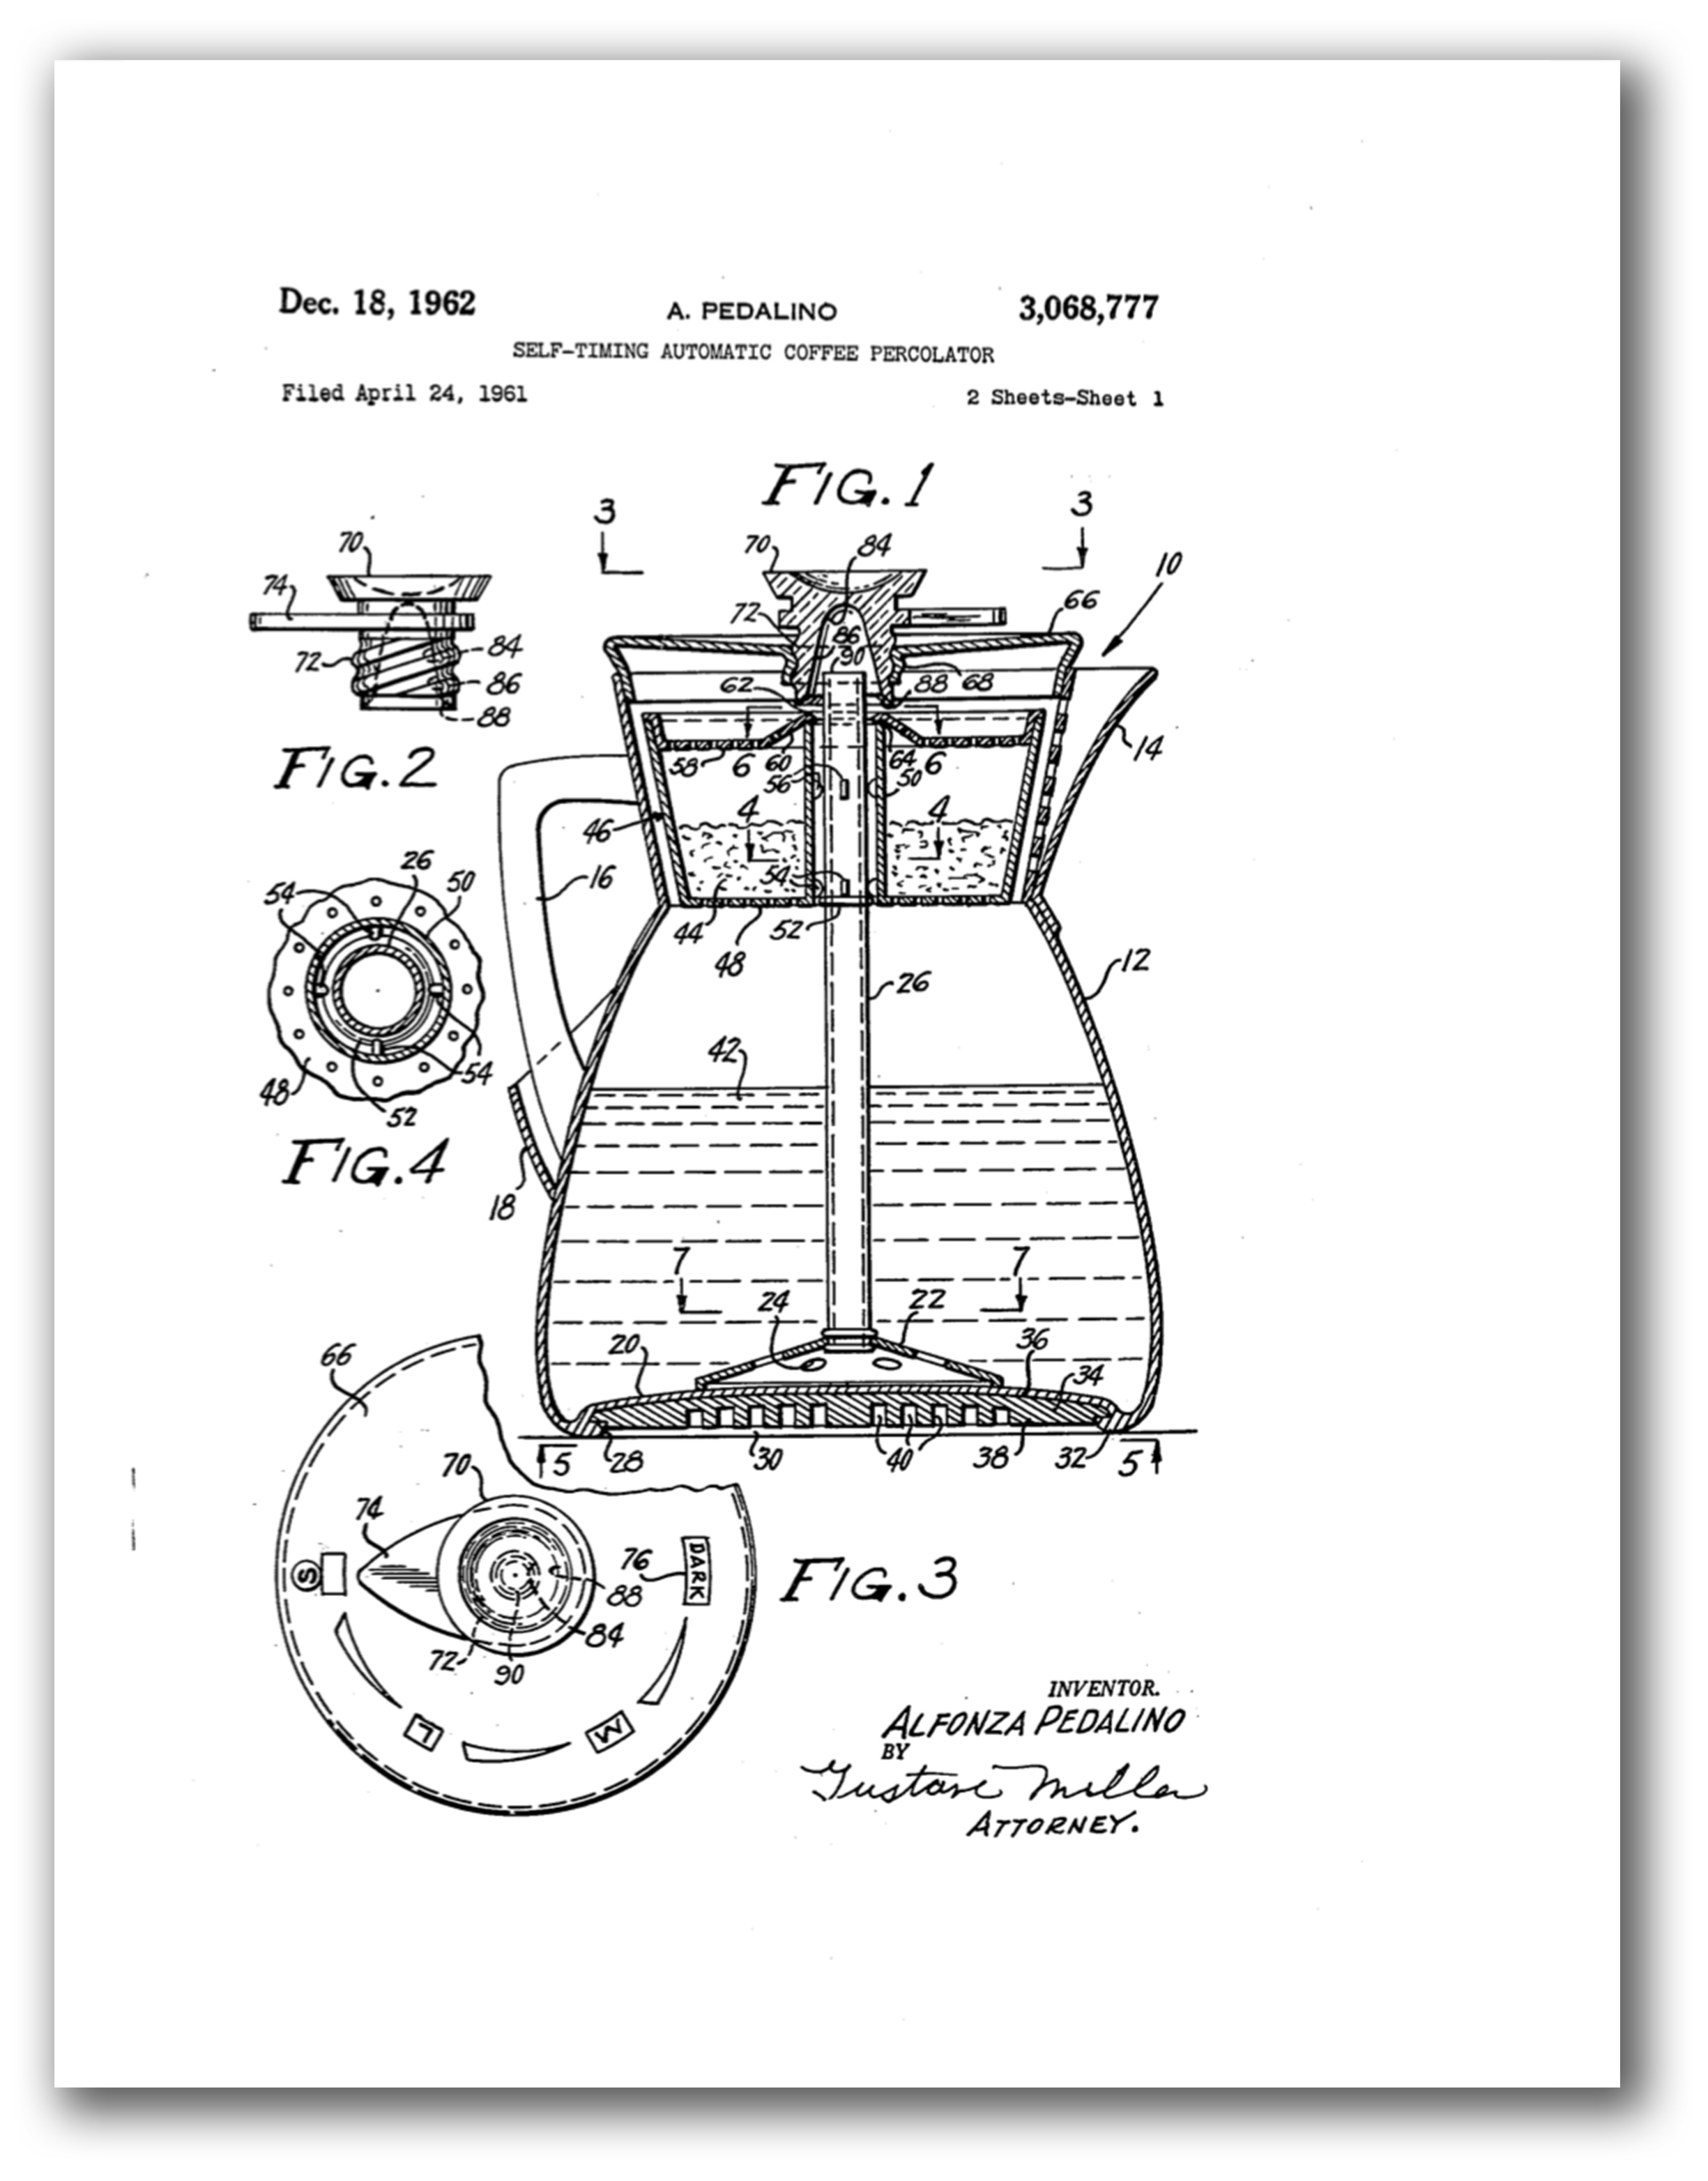 https://theruggist.com/wp-content/uploads/2019/12/caffe-unimatic-patent-drawing-the-ruggist.jpg